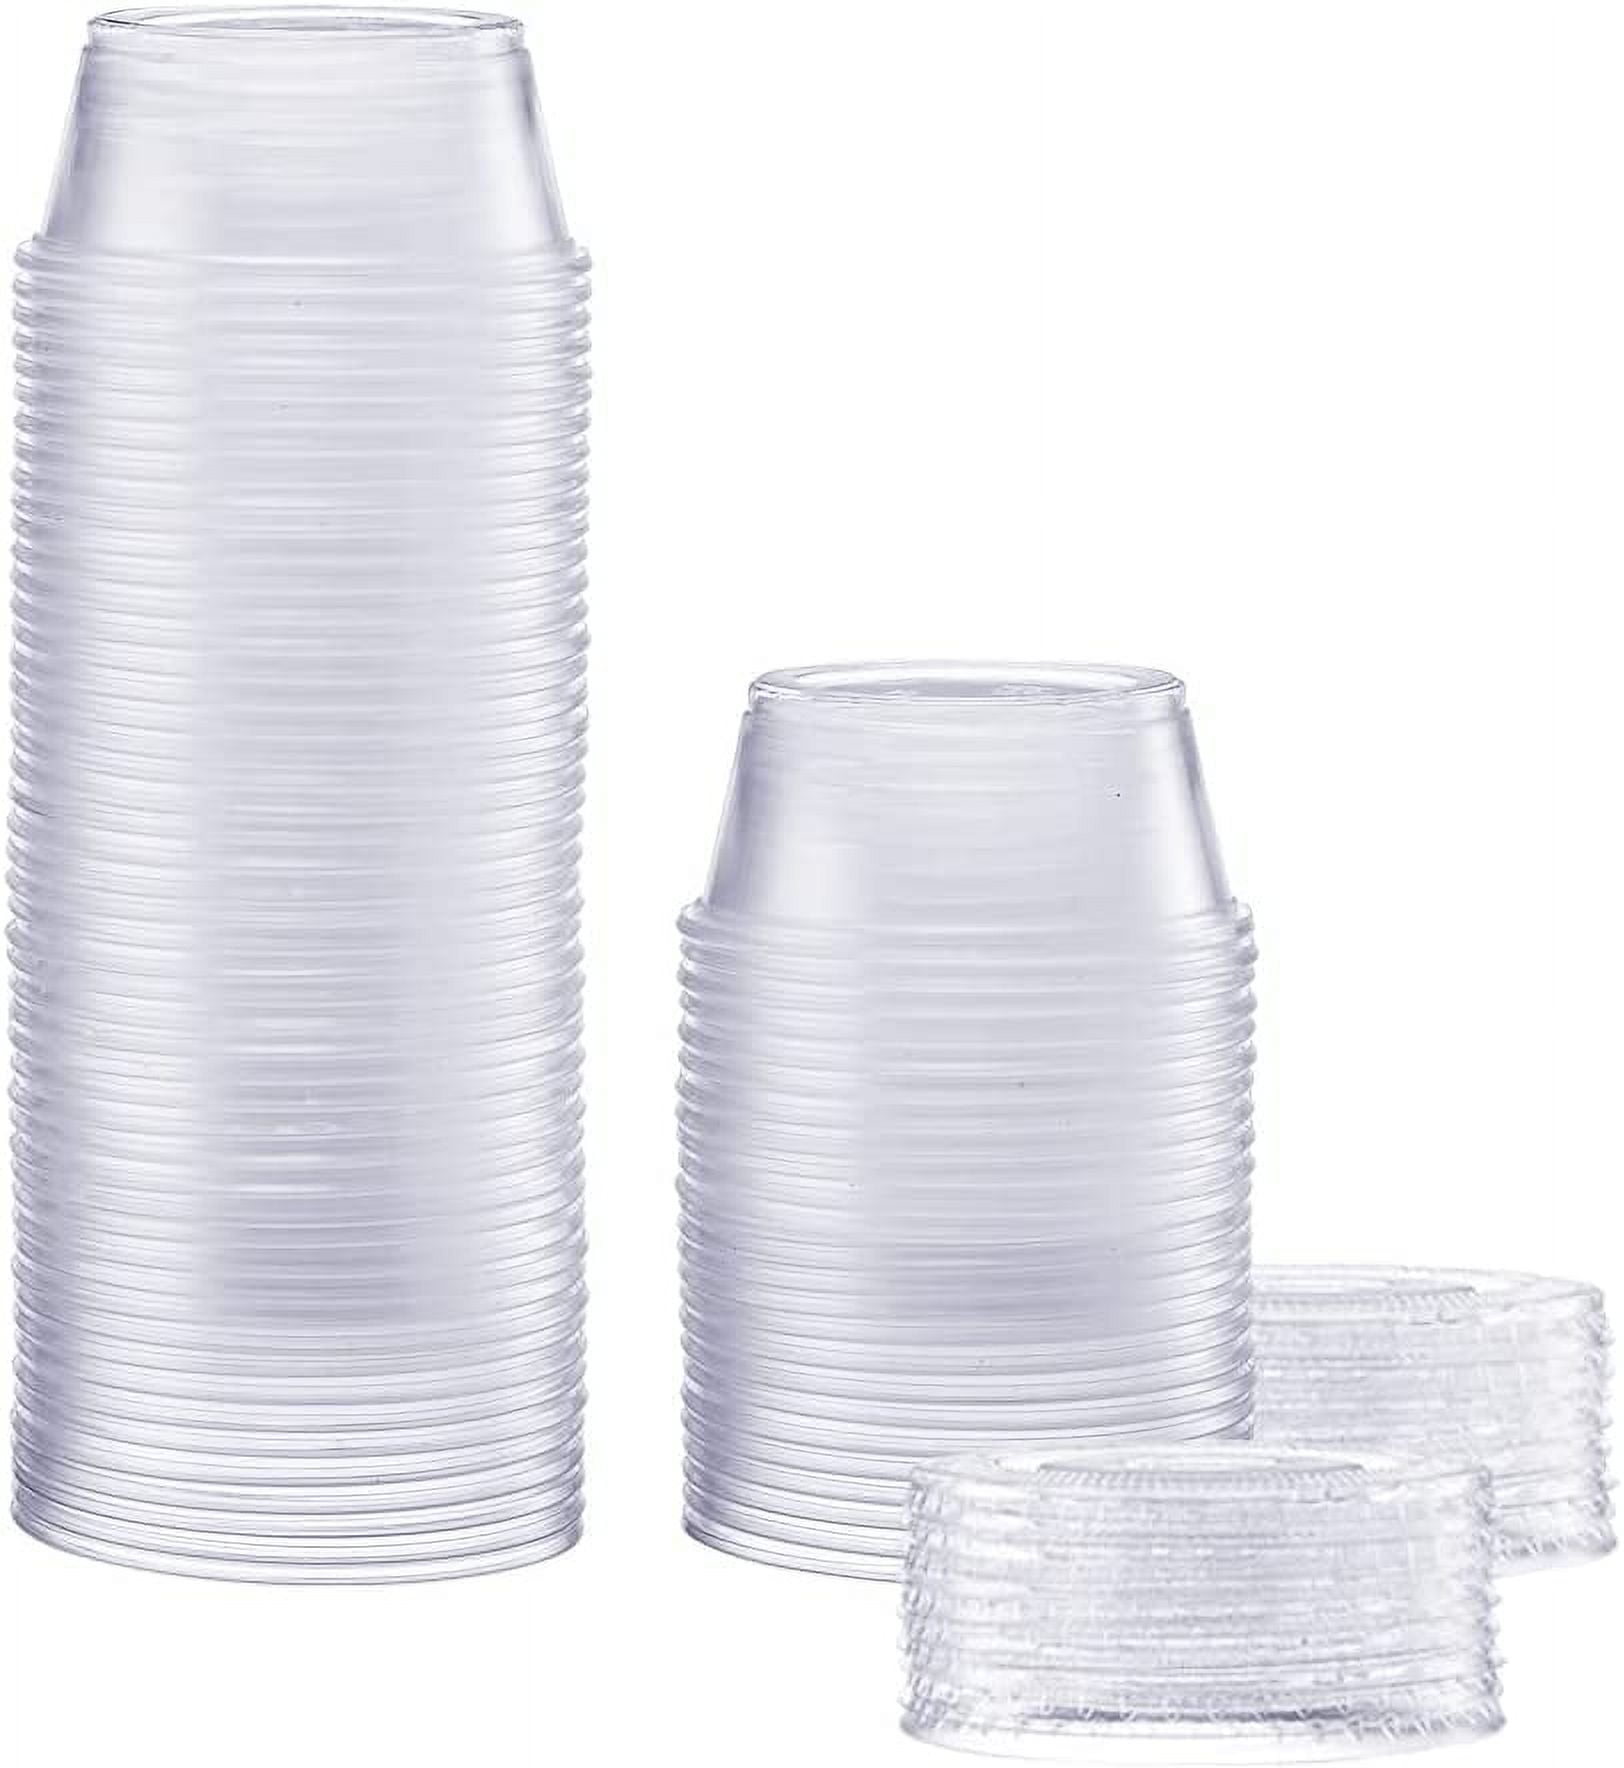 Delove [7 Pack] 2.7 oz Small Glass Condiment Containers with Lids